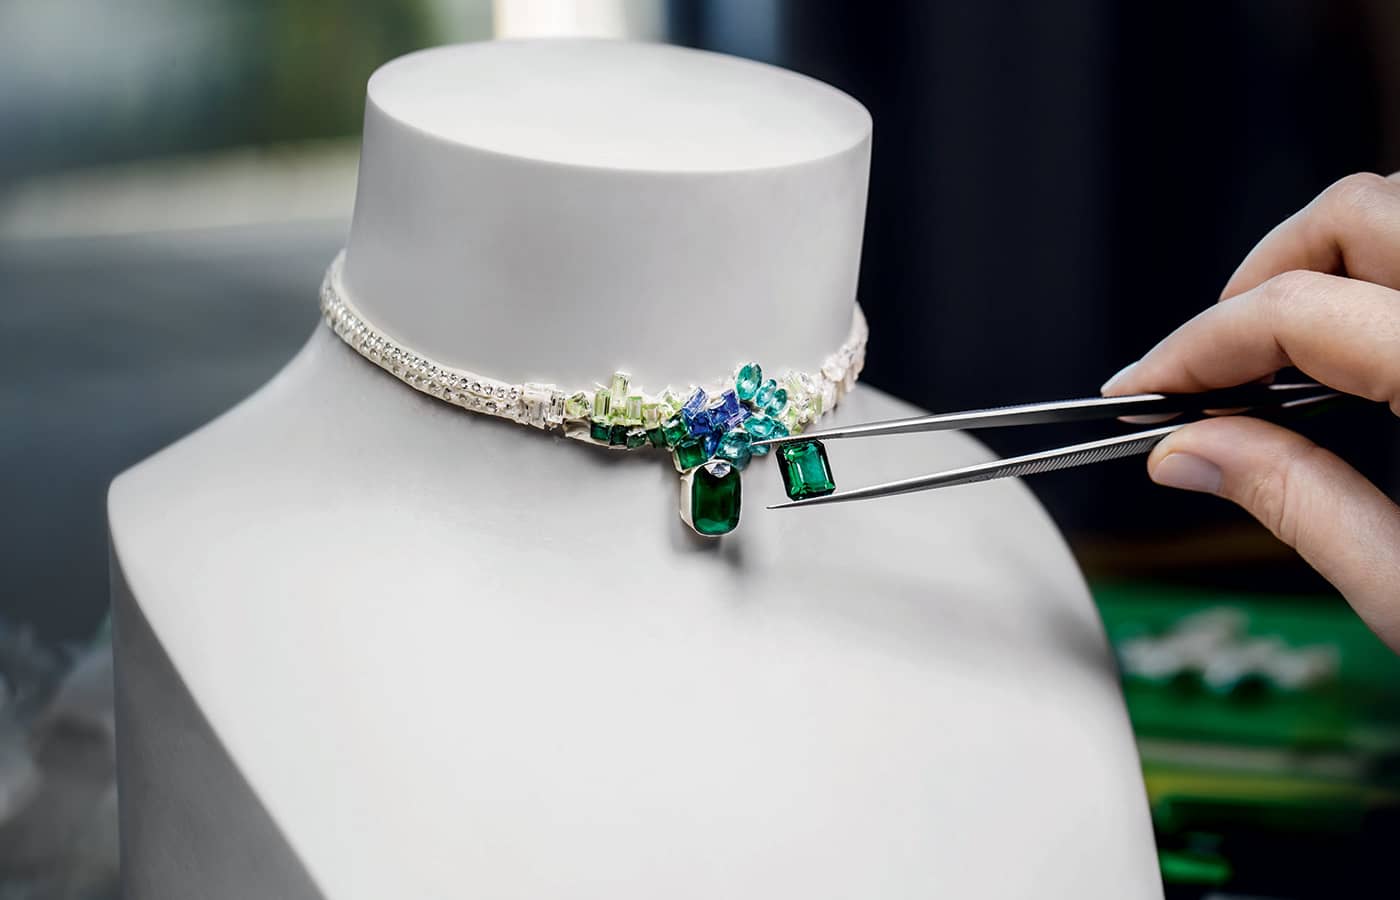 Dior Joaillerie necklace in white gold, platinum, emeralds and precious coloured gemstones from the Dearest Dior High Jewellery collection